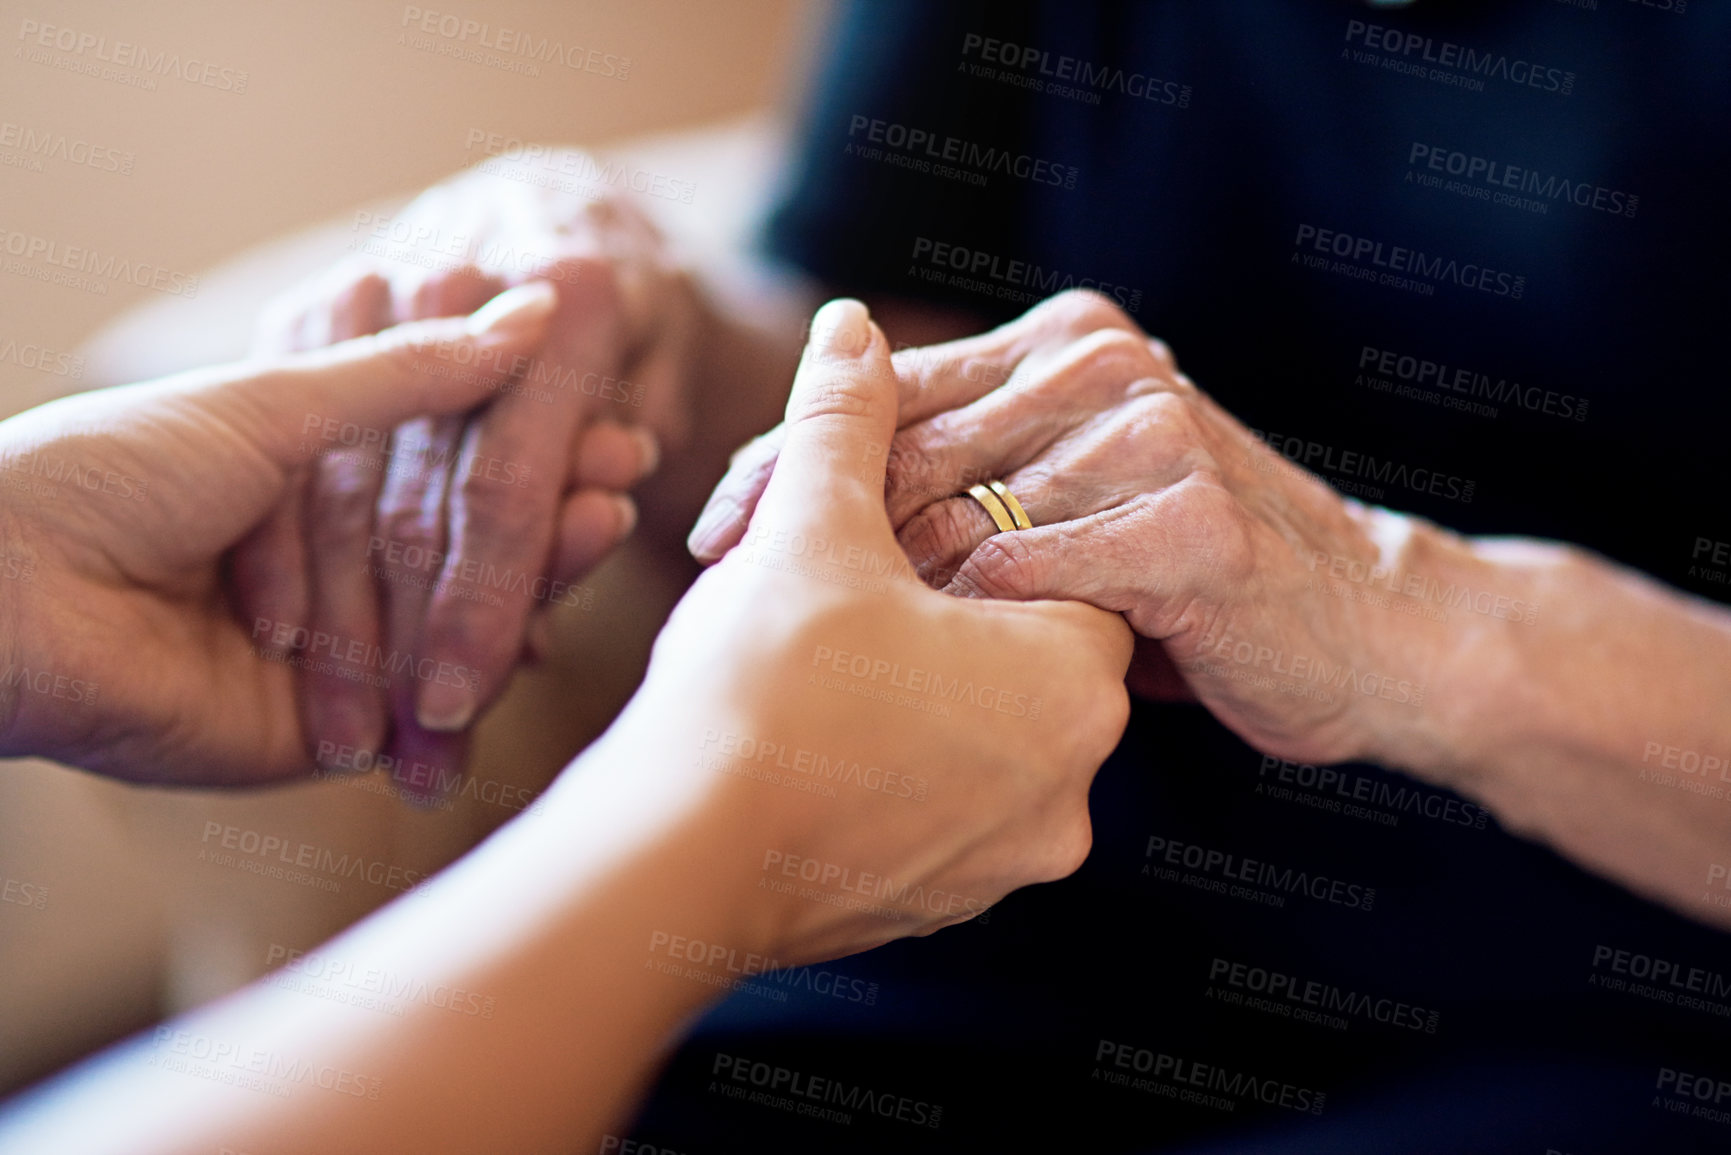 Buy stock photo Cropped shot of a person holding an elderly woman’s hands